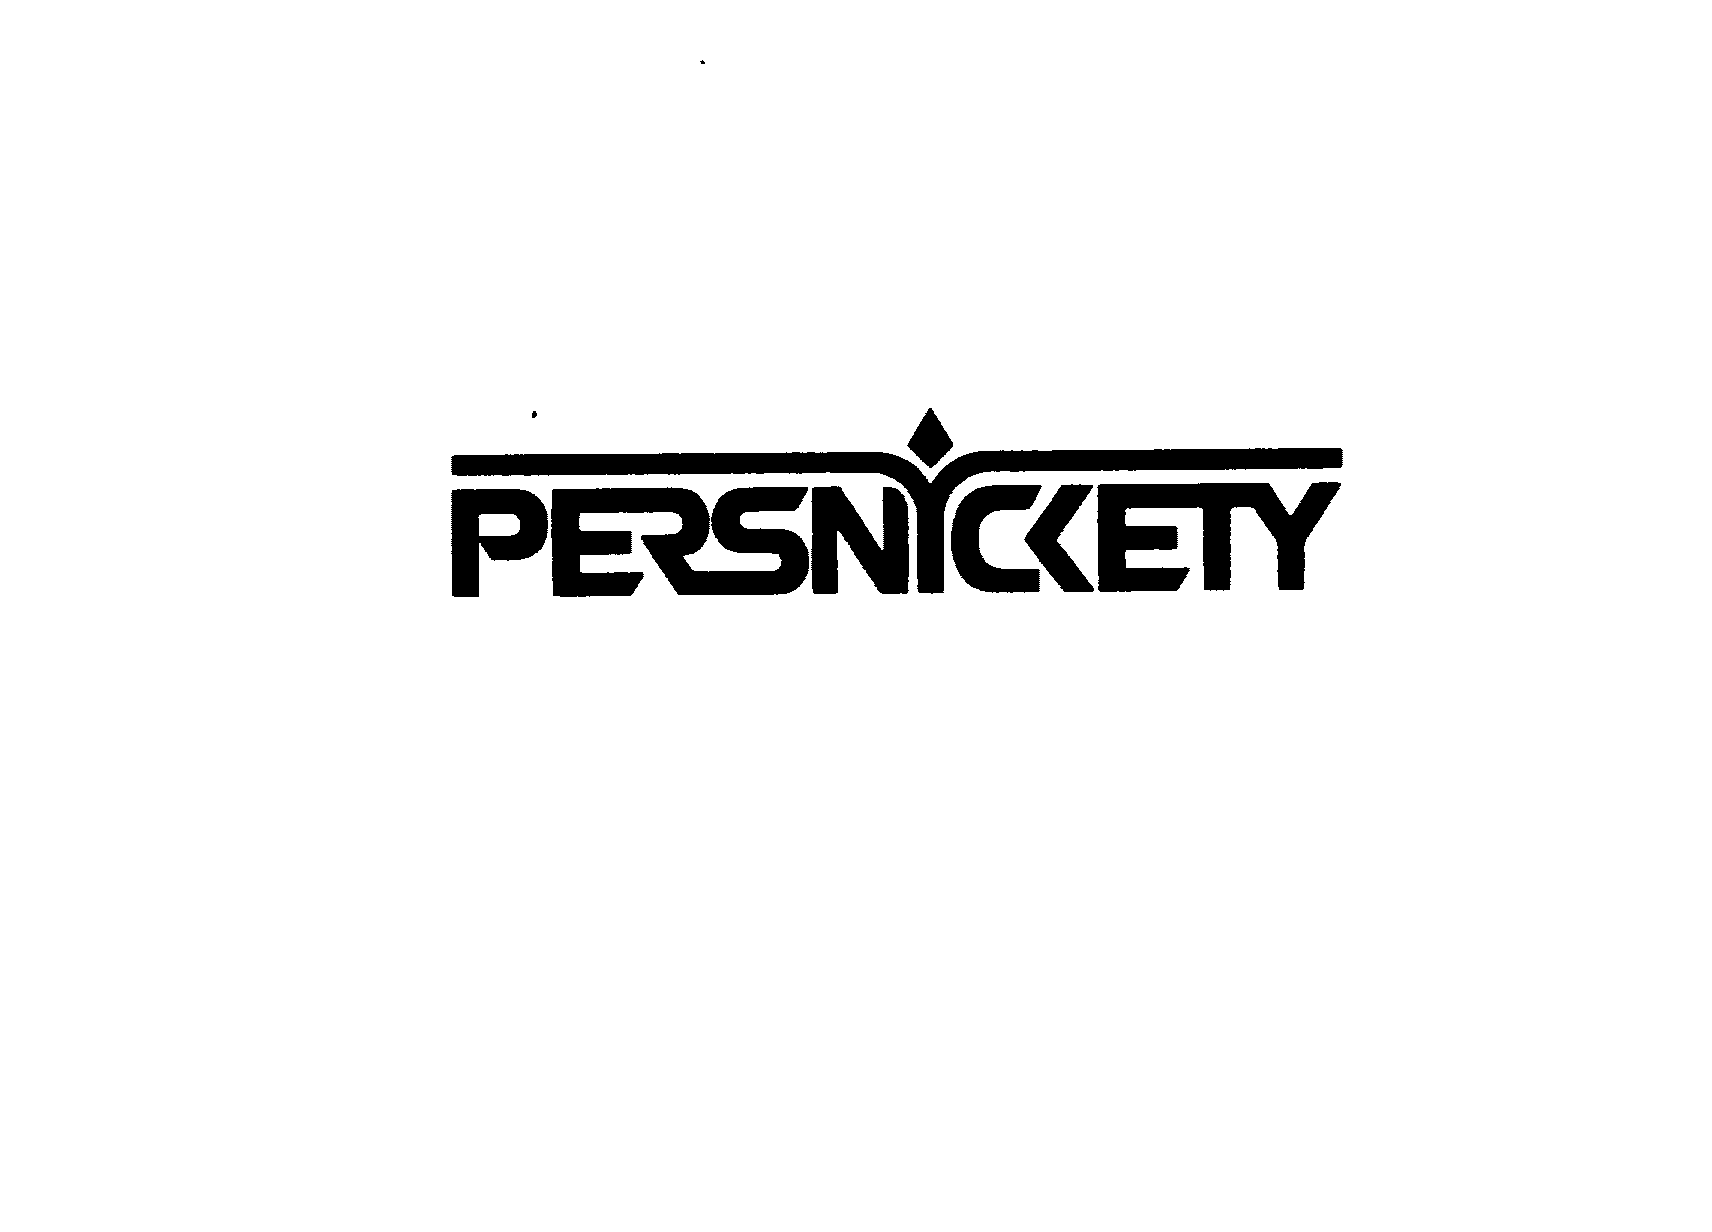 PERSNICKETY